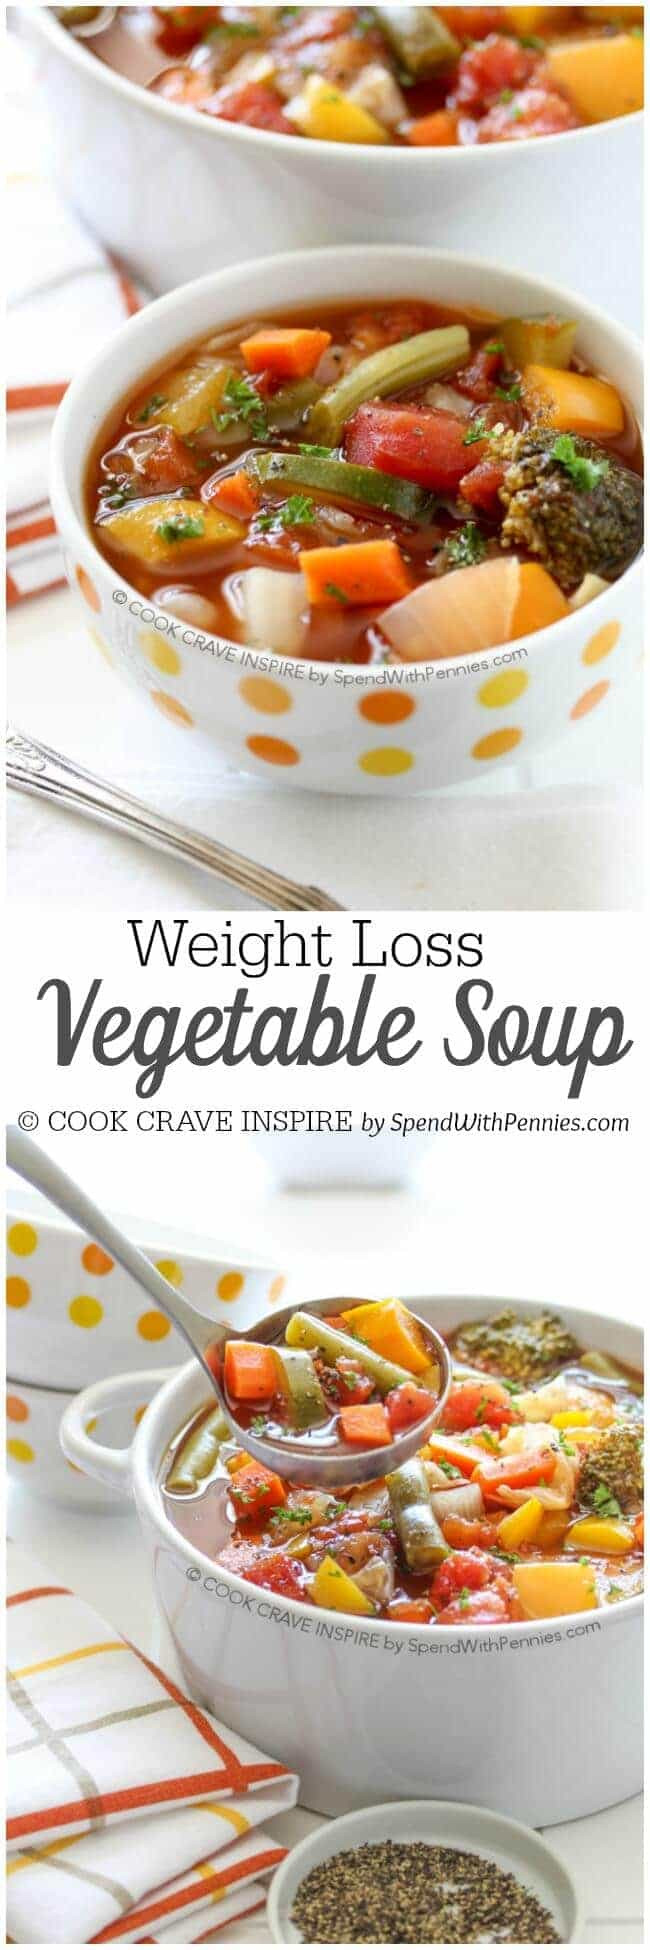 Healthy Vegetable Soup Recipes For Weight Loss
 Weight Loss Ve able Soup Recipe Spend With Pennies